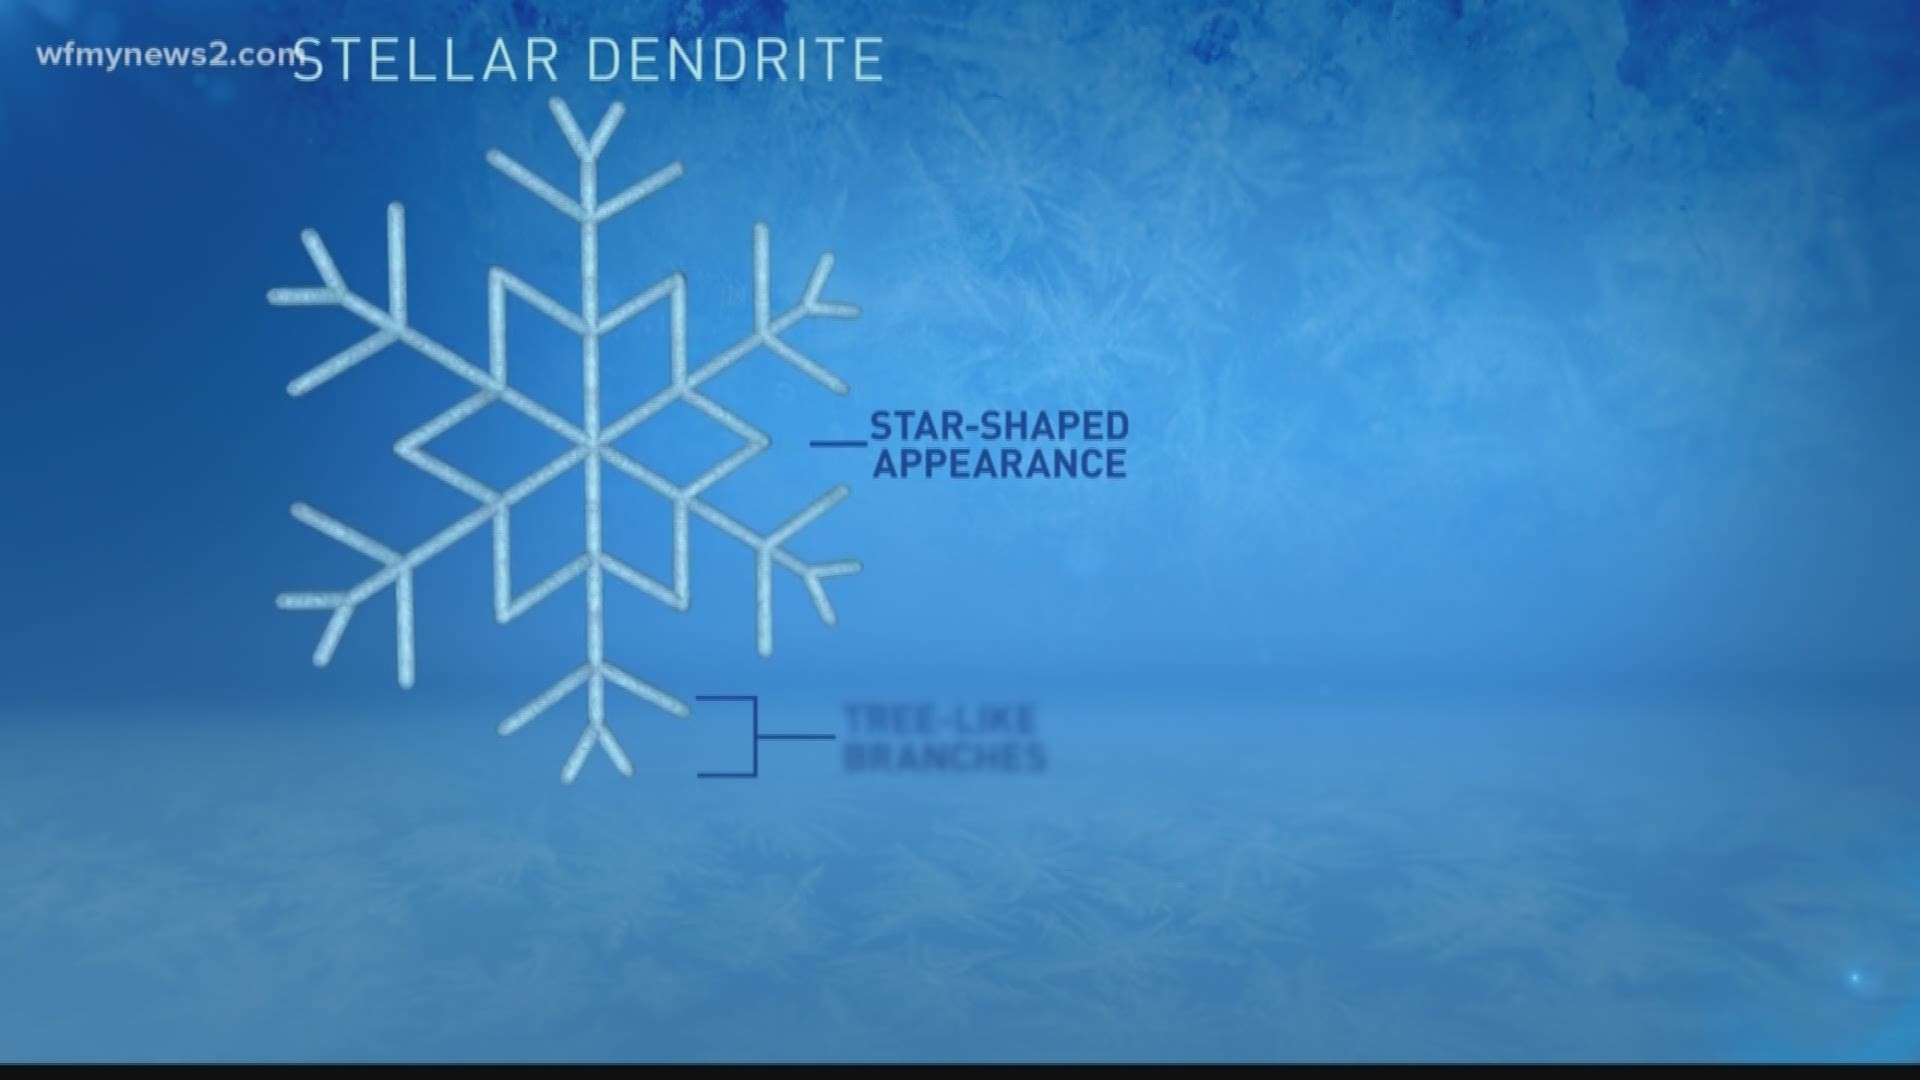 No two snowflakes are alike, so we take a closer look at what makes them so unique.